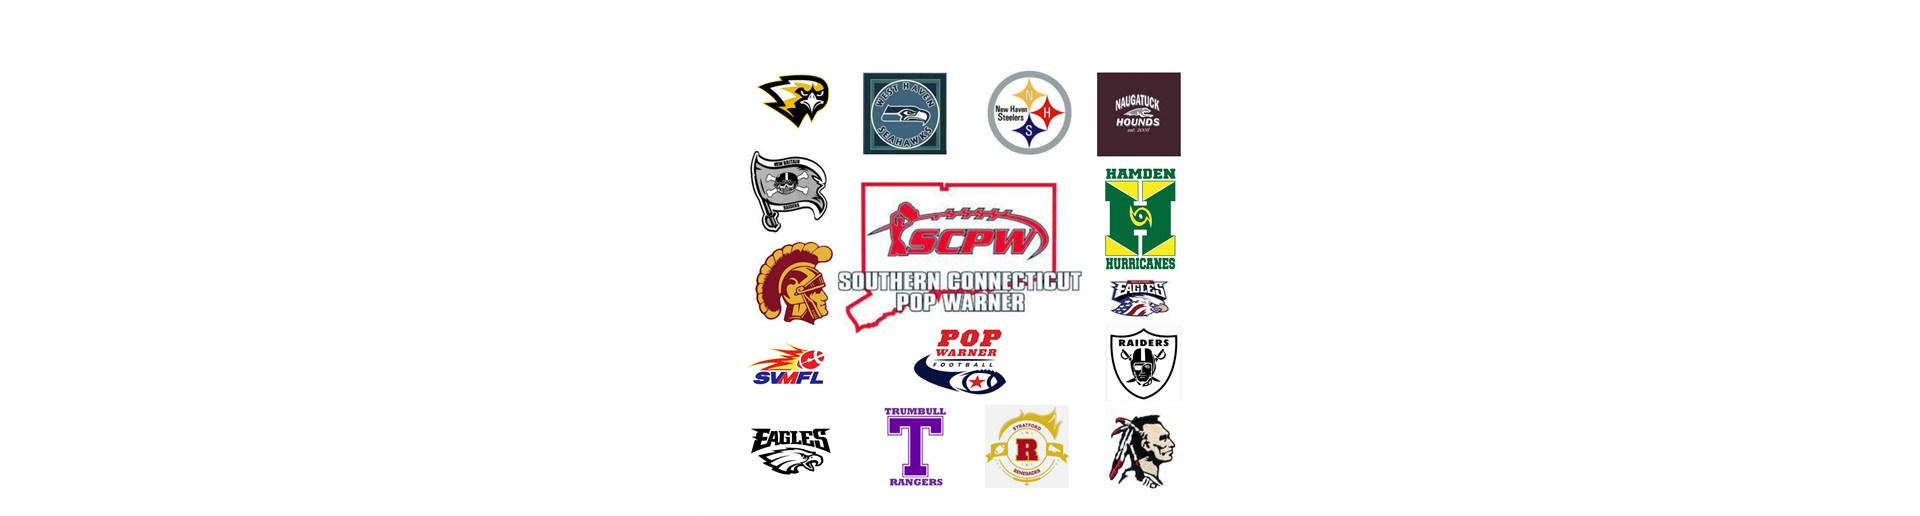 SCPW Football and Cheer Associations